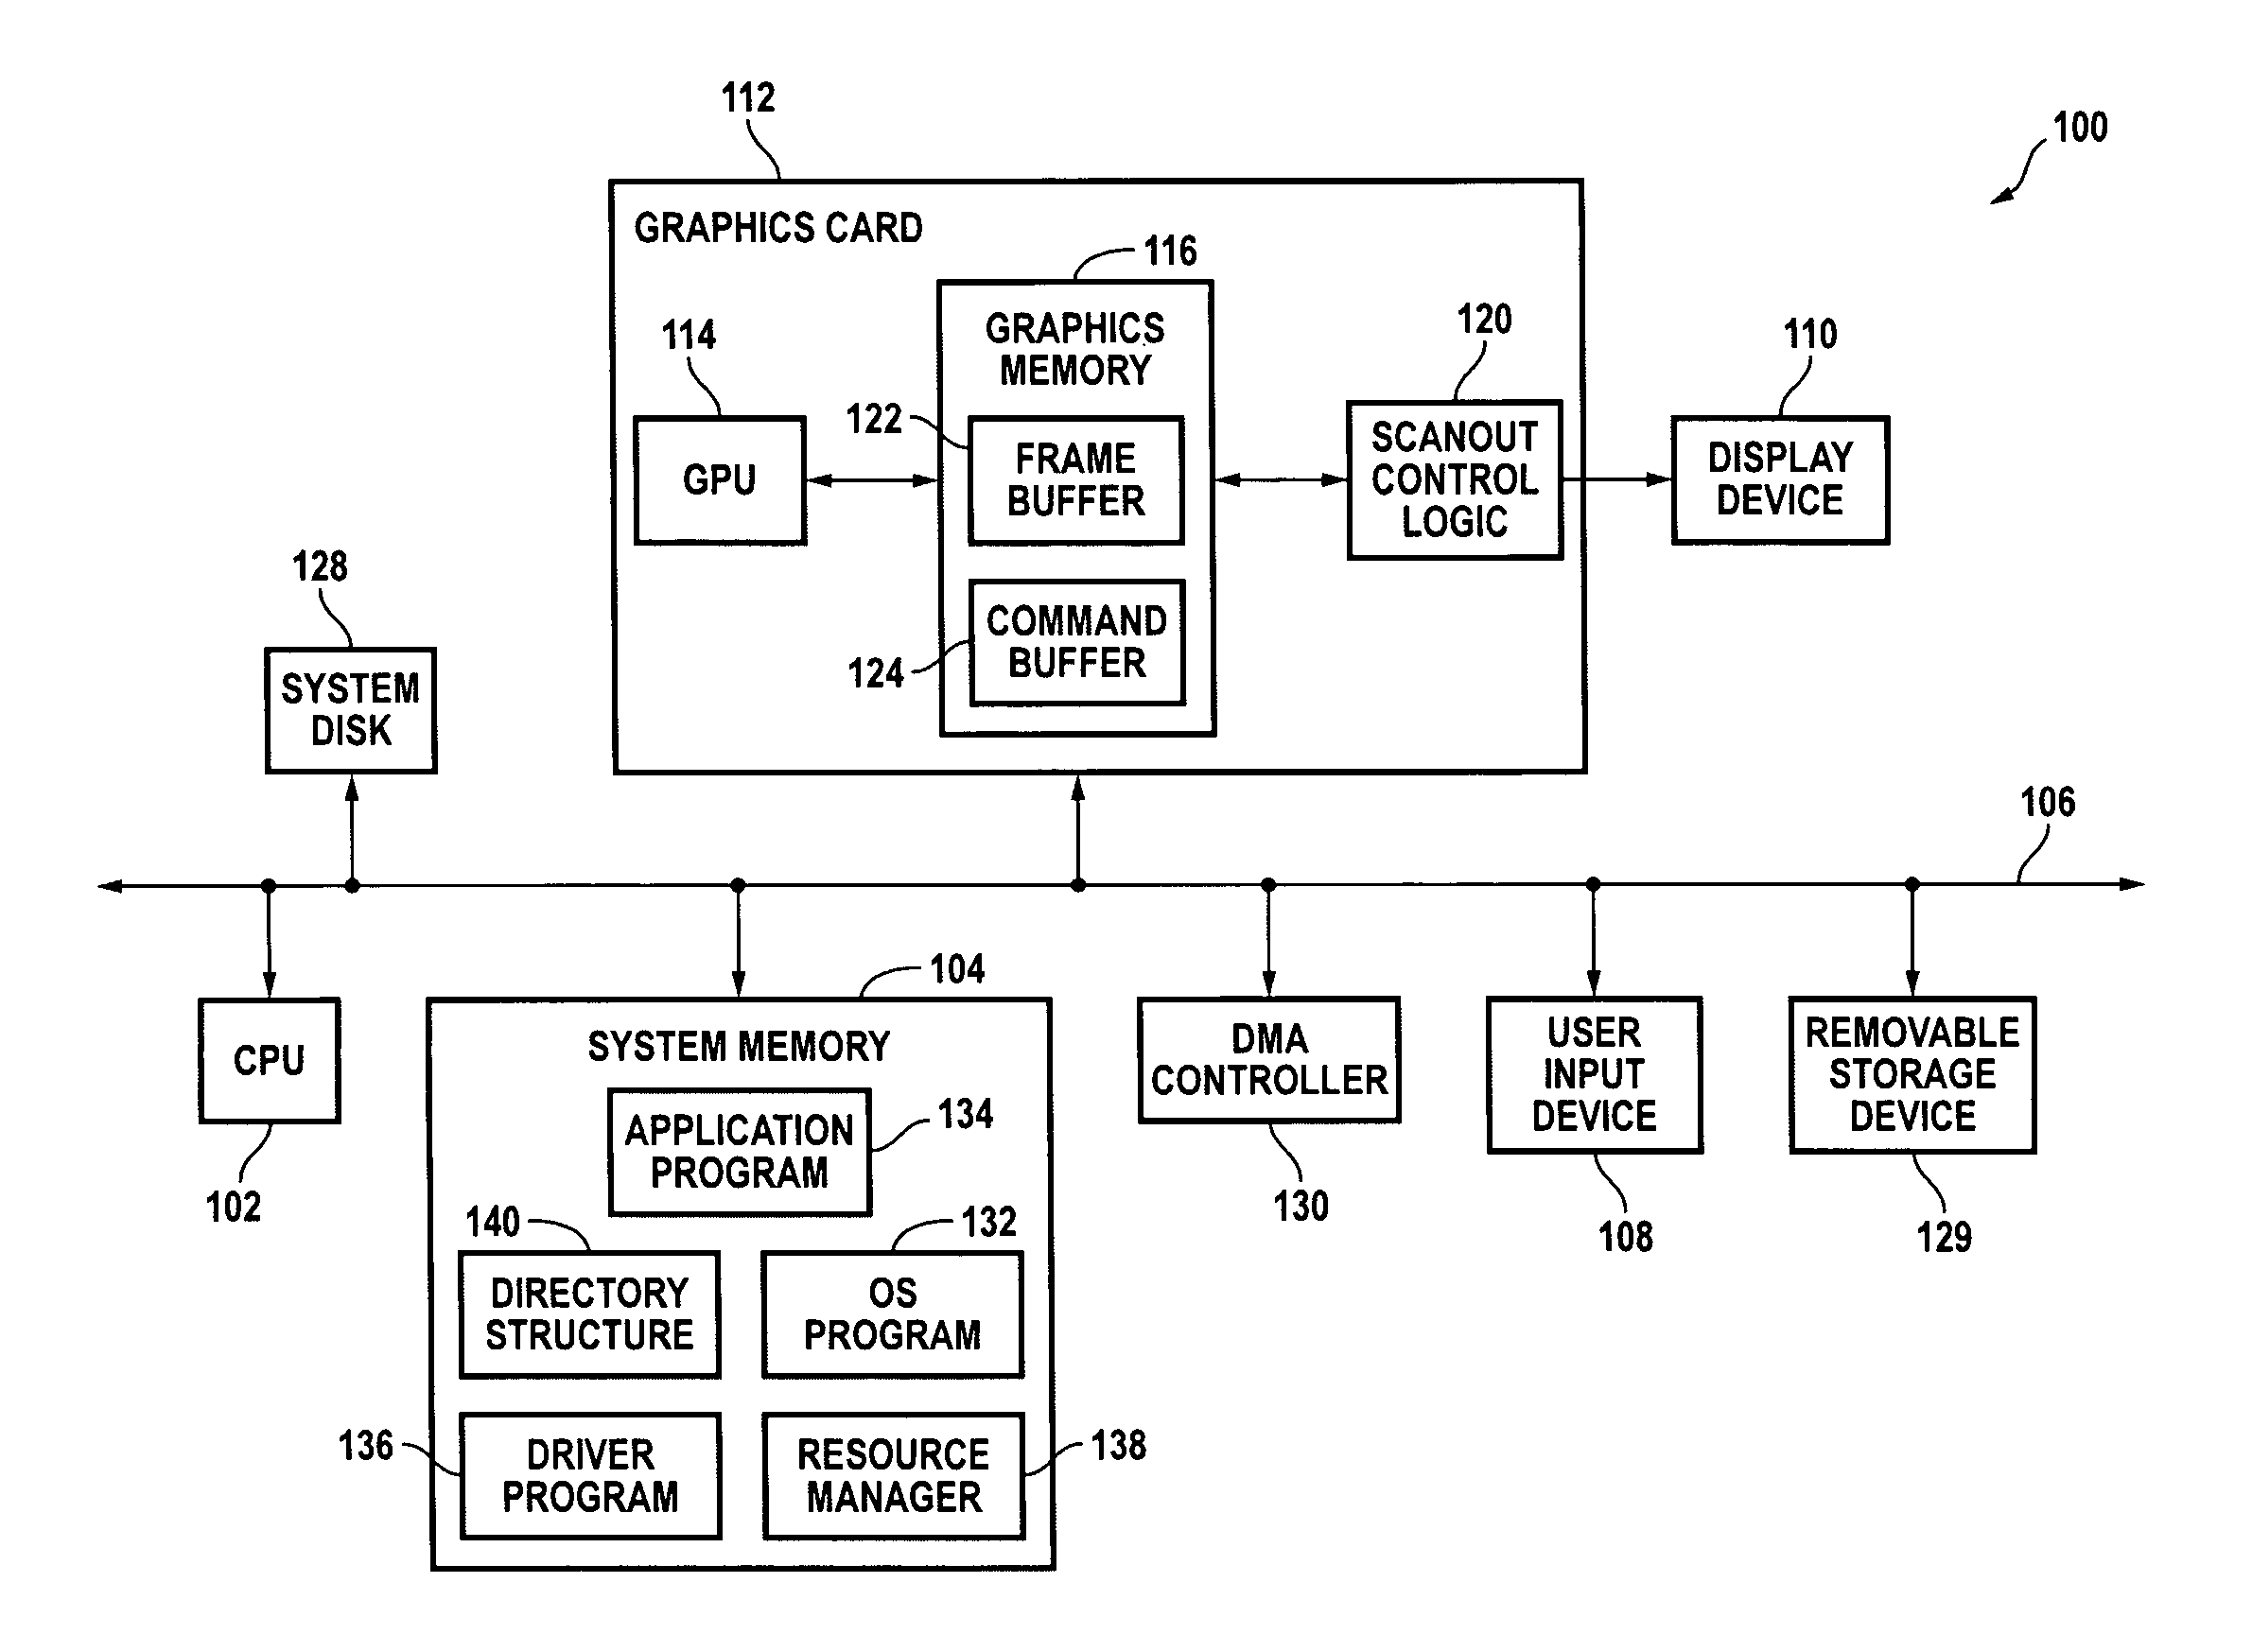 Dynamically creating or removing a physical-to-virtual address mapping in a memory of a peripheral device